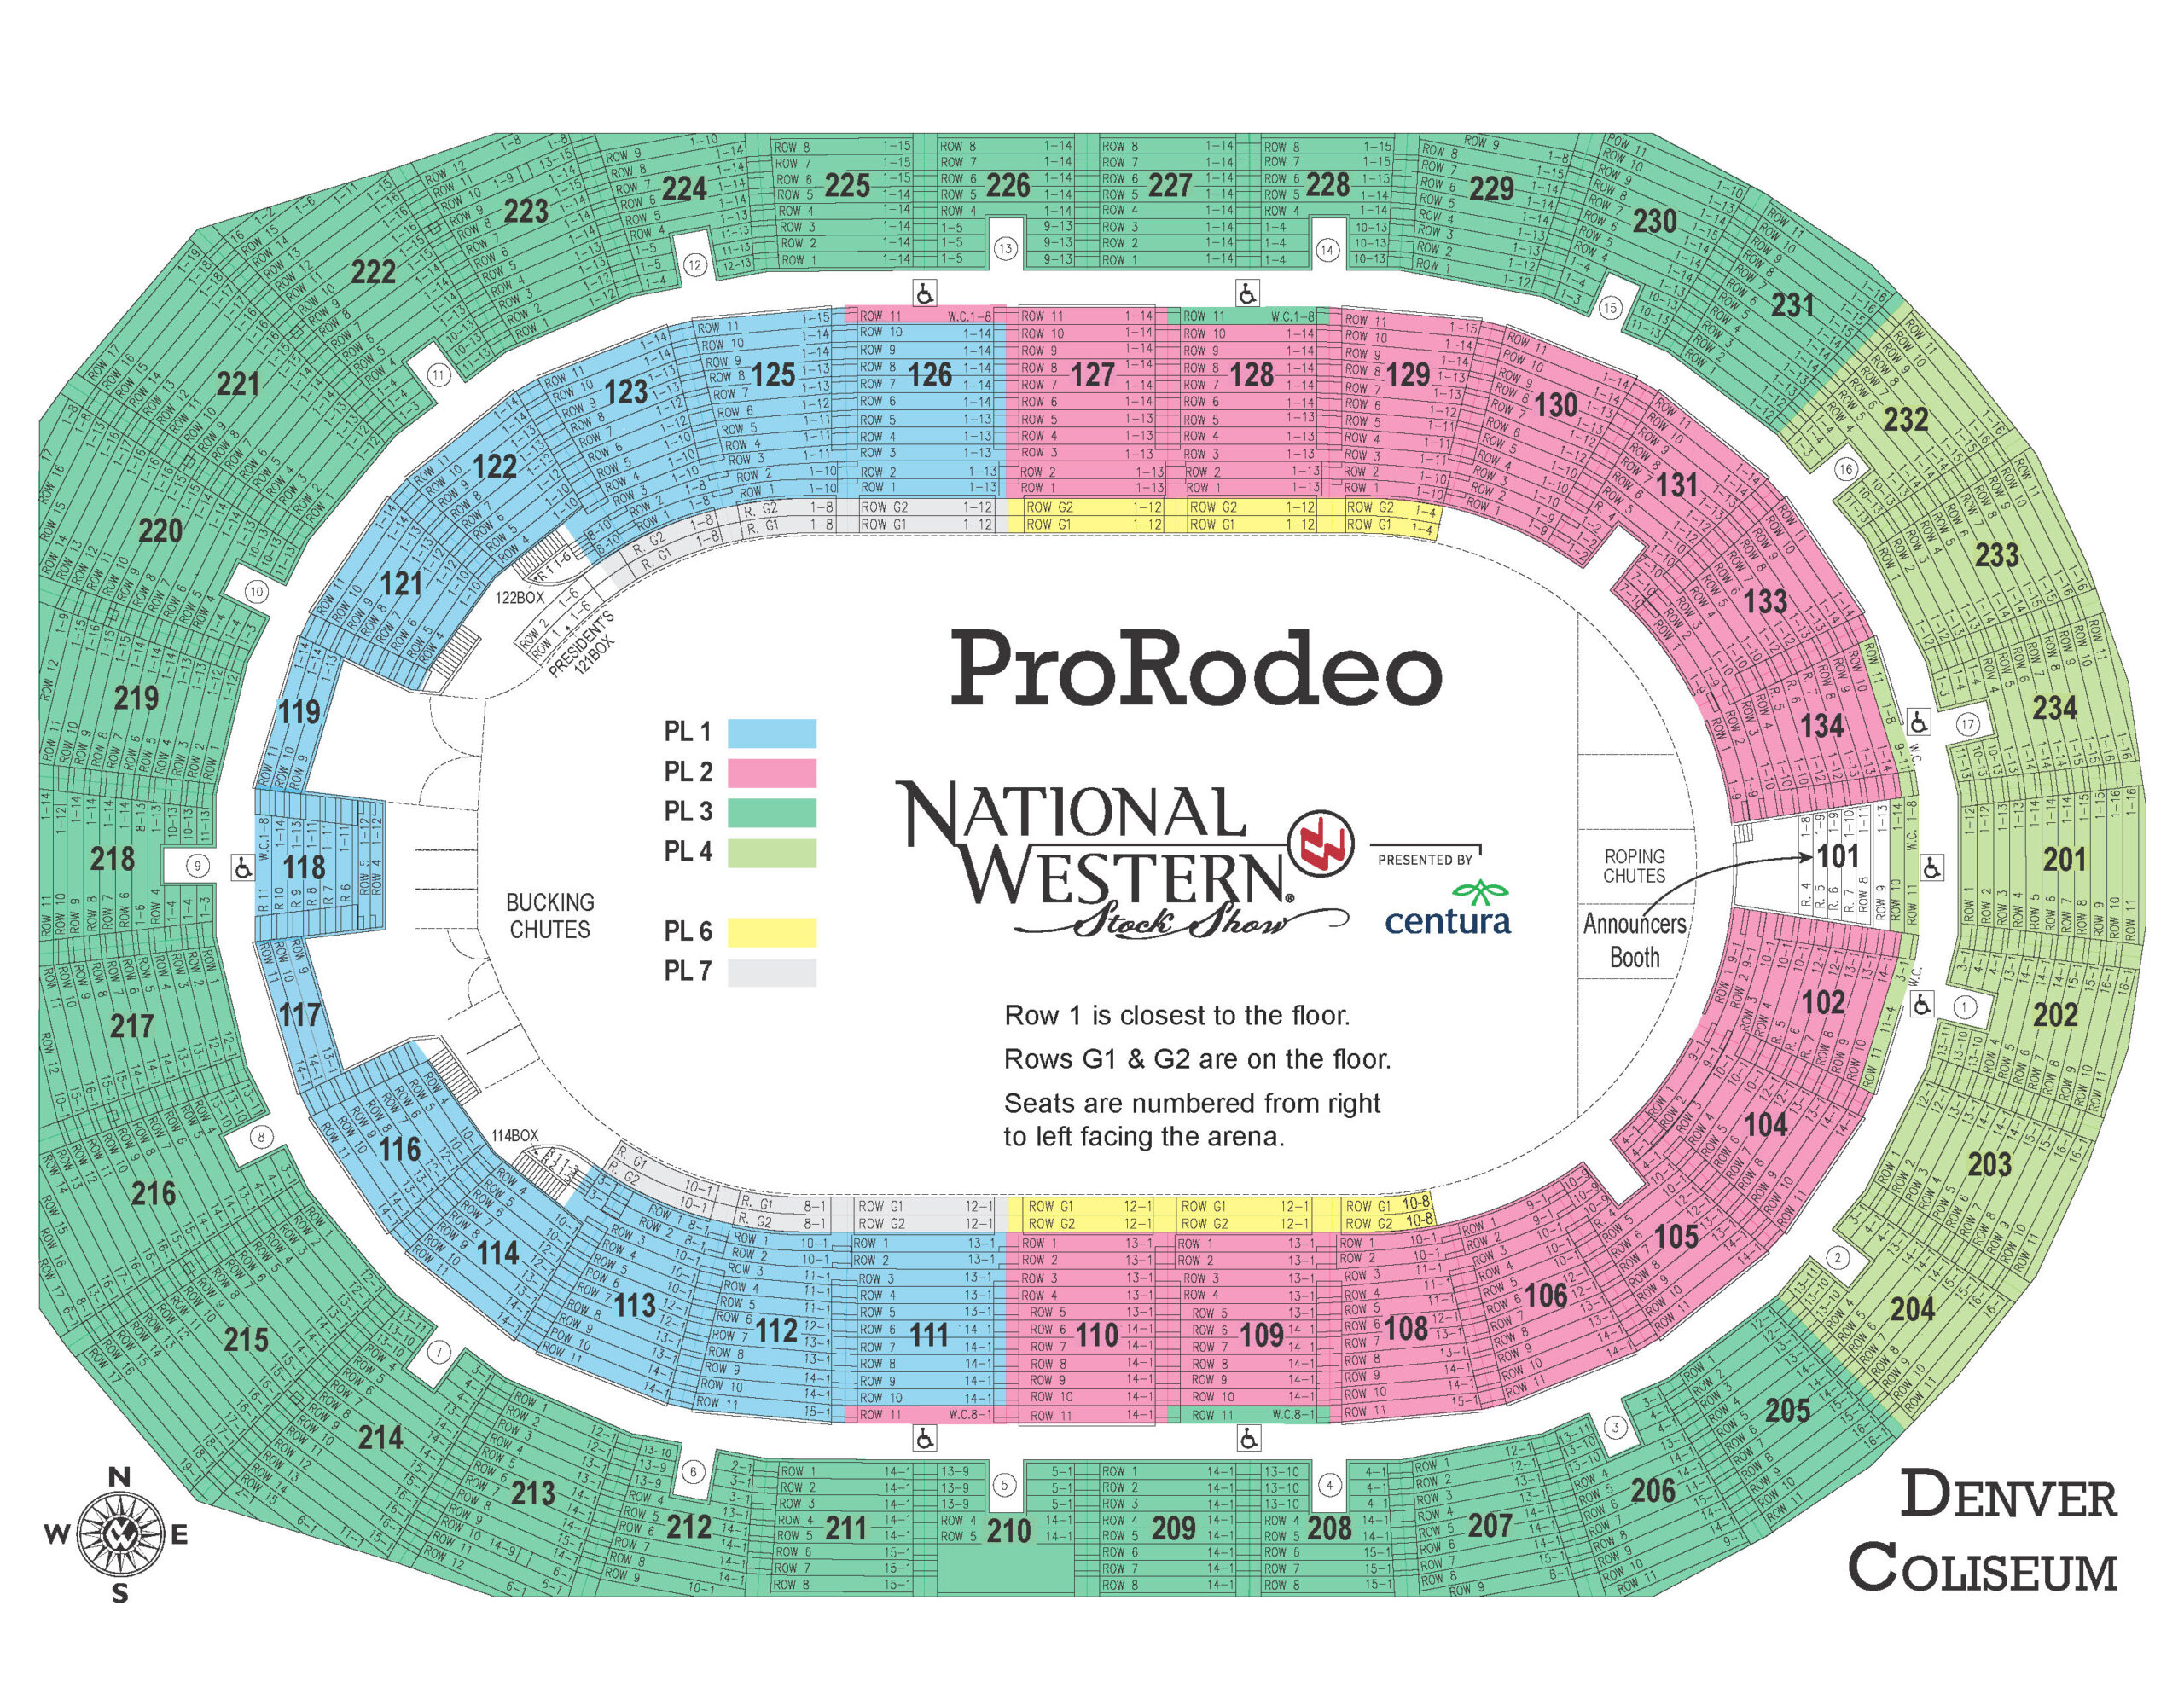 Pro Rodeo Map